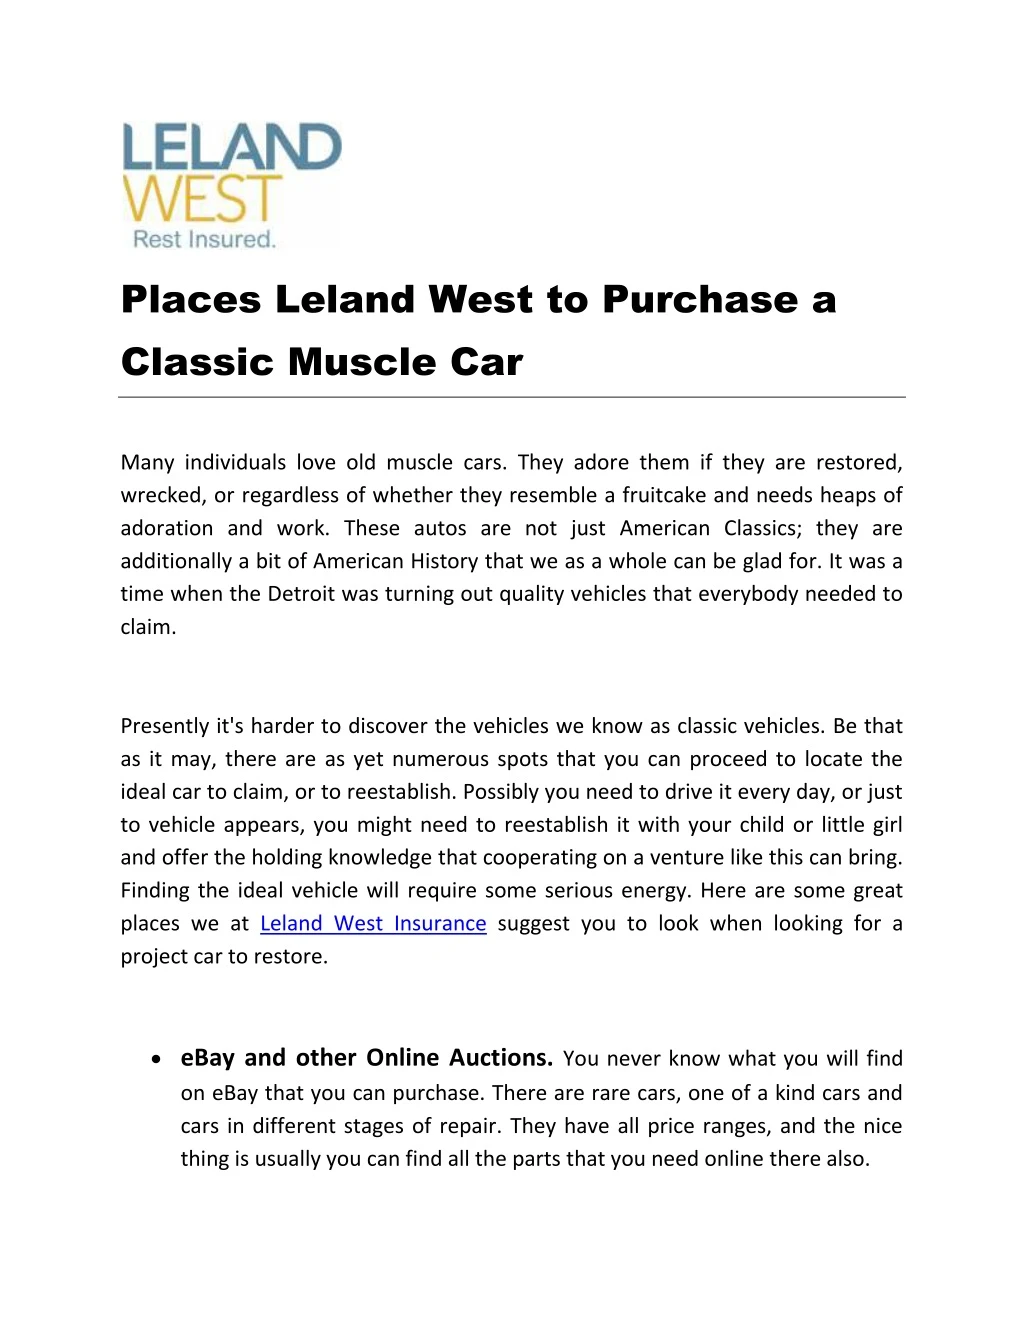 places leland west to purchase a classic muscle